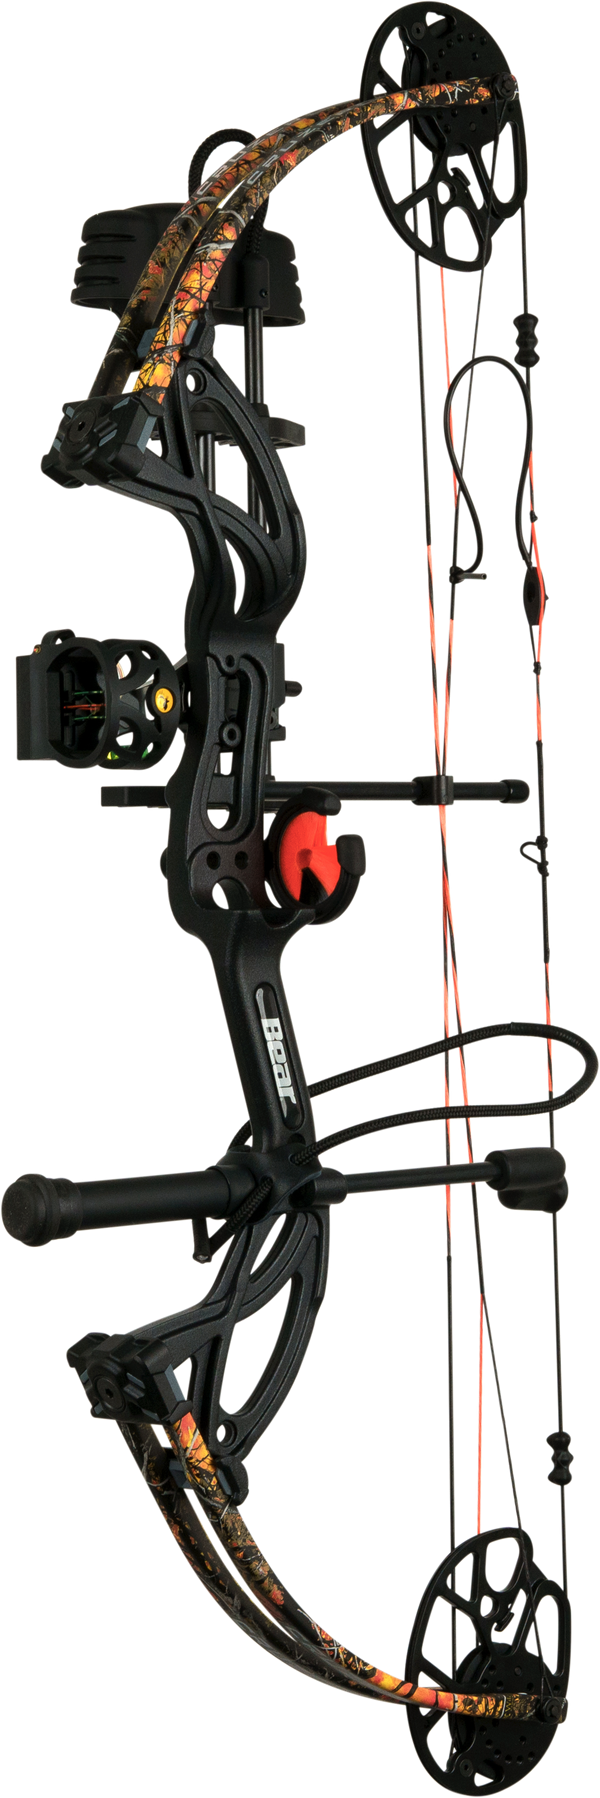 Bear Archery Cruzer G2 Adult Compound Bow – Moonshine Wildfire